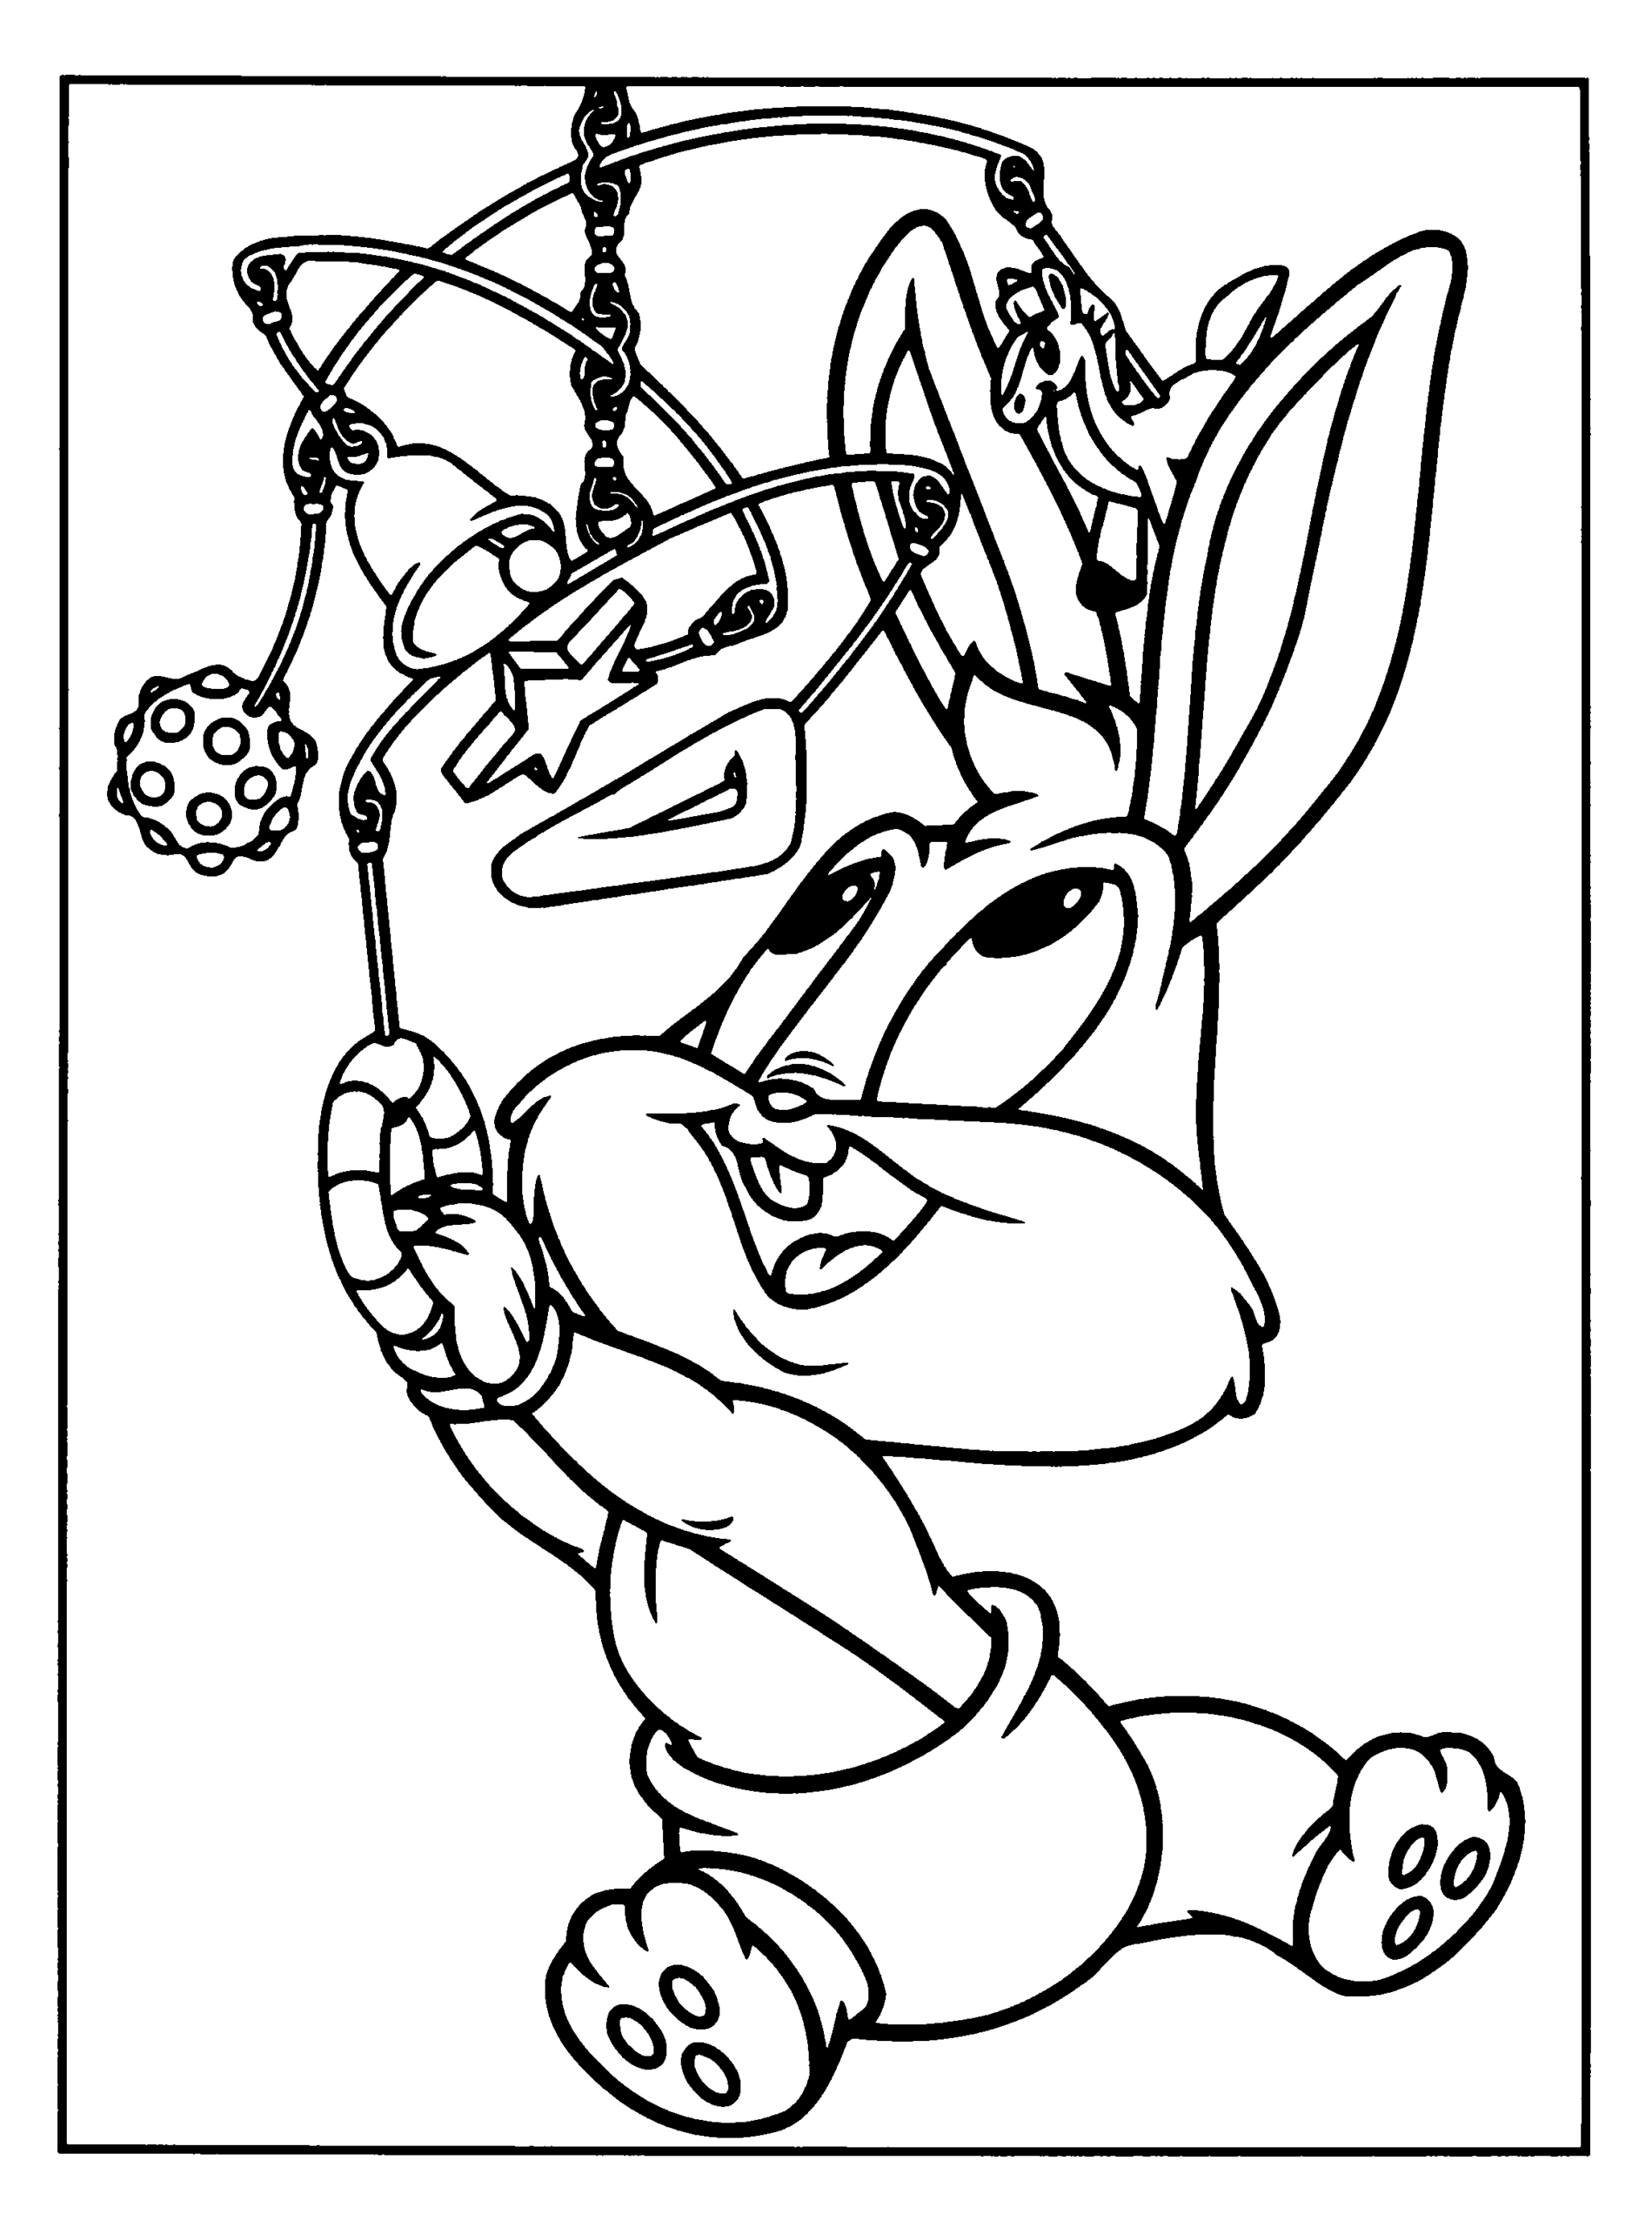 Baby Looney Tunes Coloring Pages TV Film baby looney tunes zcDGt Printable 2020 00402 Coloring4free